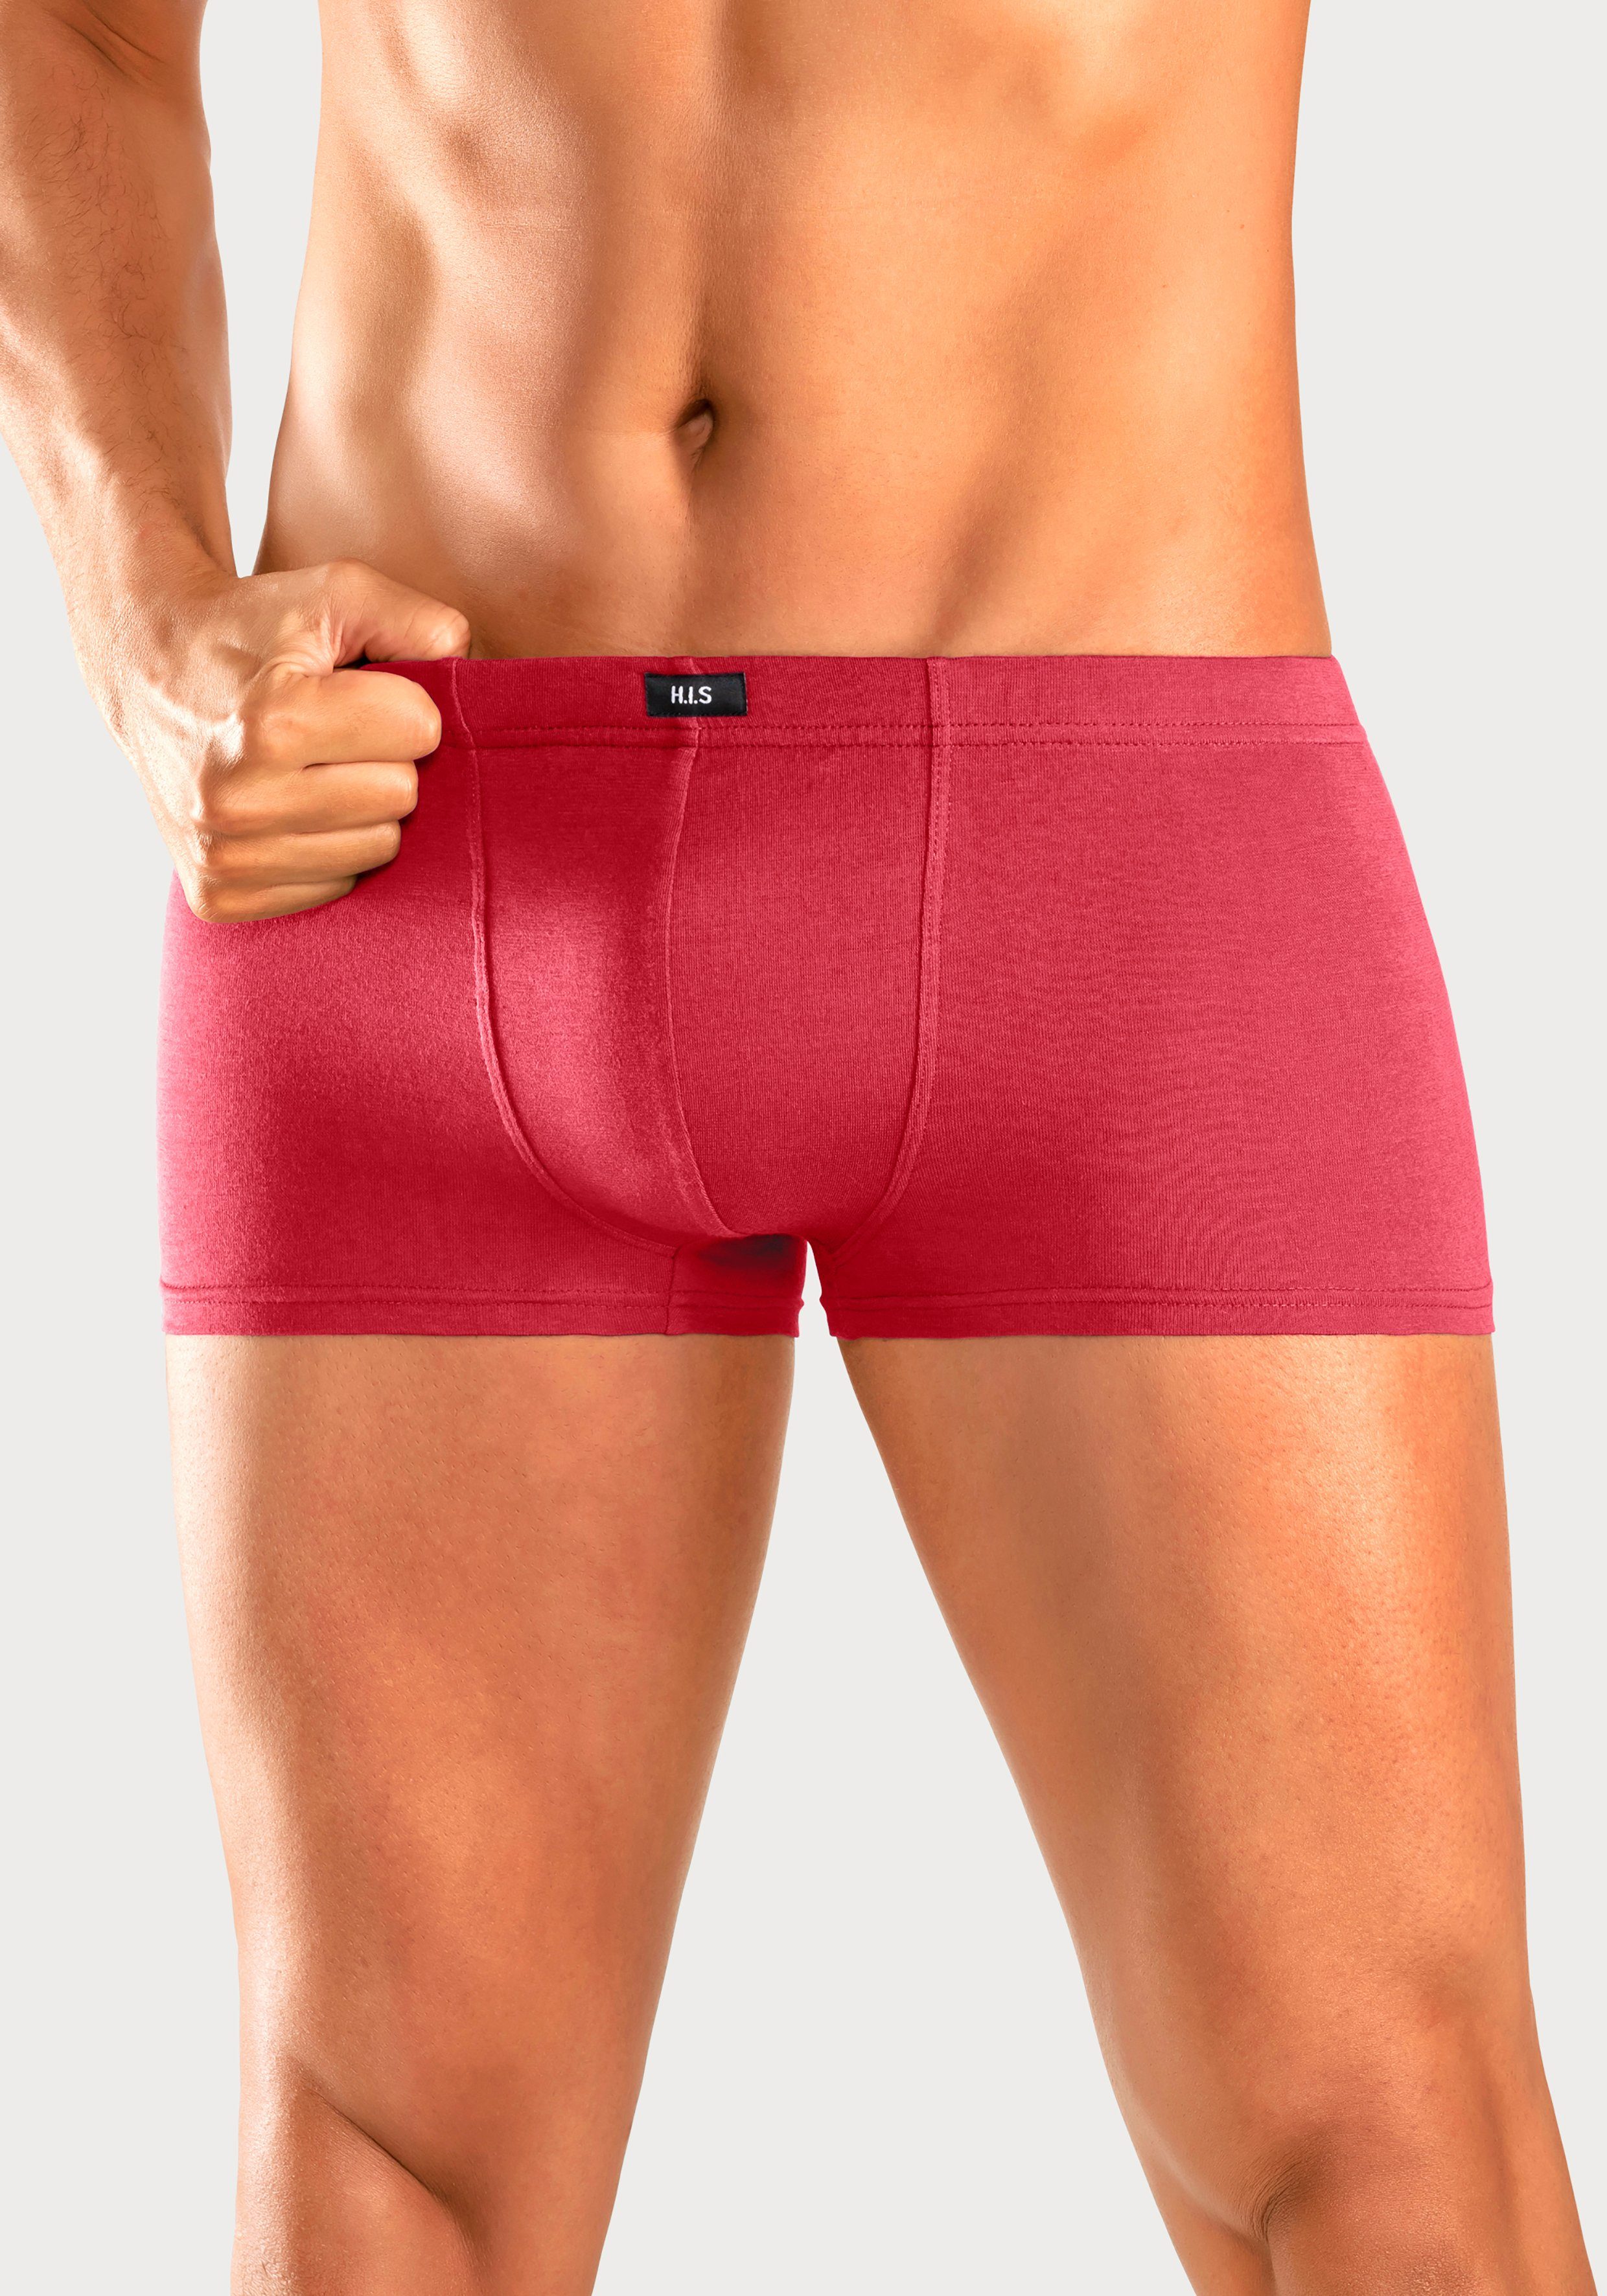 H.I.S Boxershorts (Packung, 5-St) in Hipster-Form aus Baumwollstretch, H.I.S  Hipster im 5er Pack